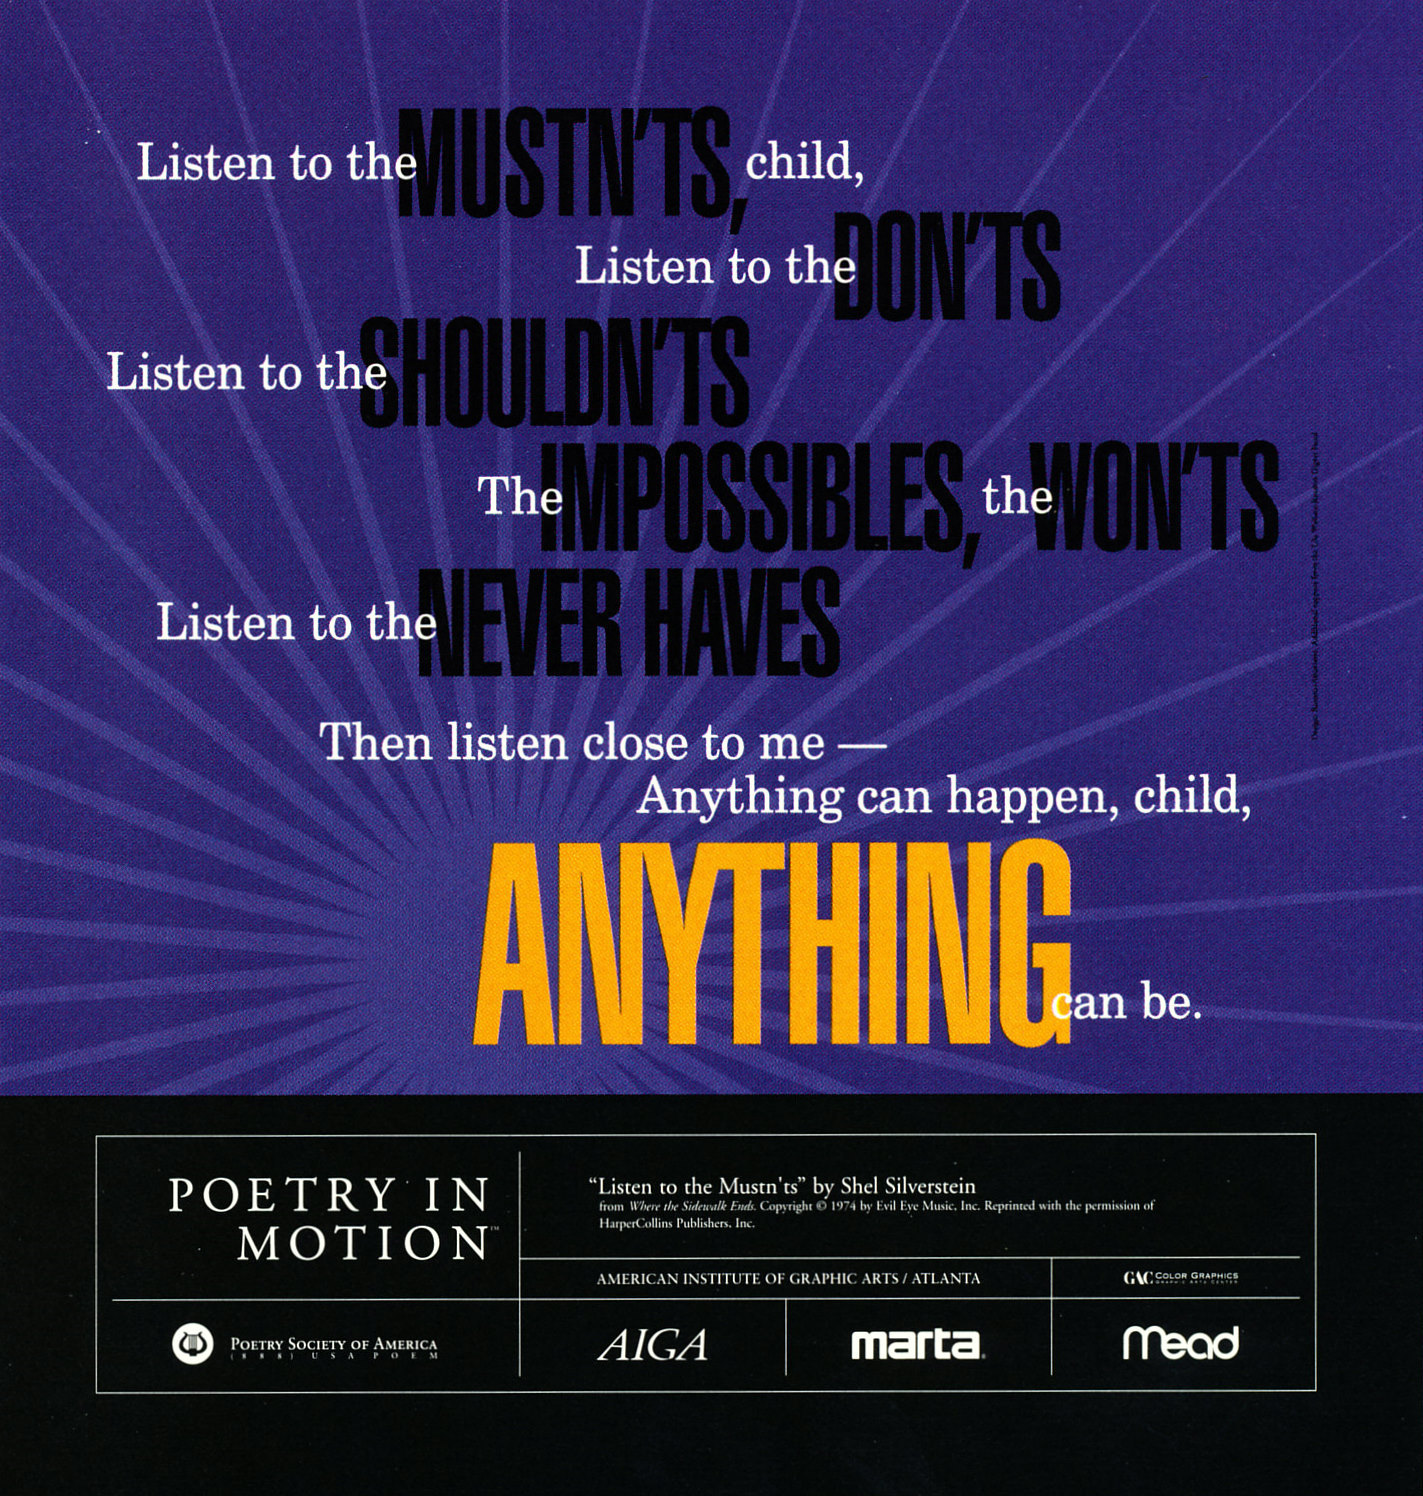 A purple poster features the poem Listen to the Mustn’ts by Shel Silverstein written in white, black and yellow text. Behind the poem light purple rays extend up and out.